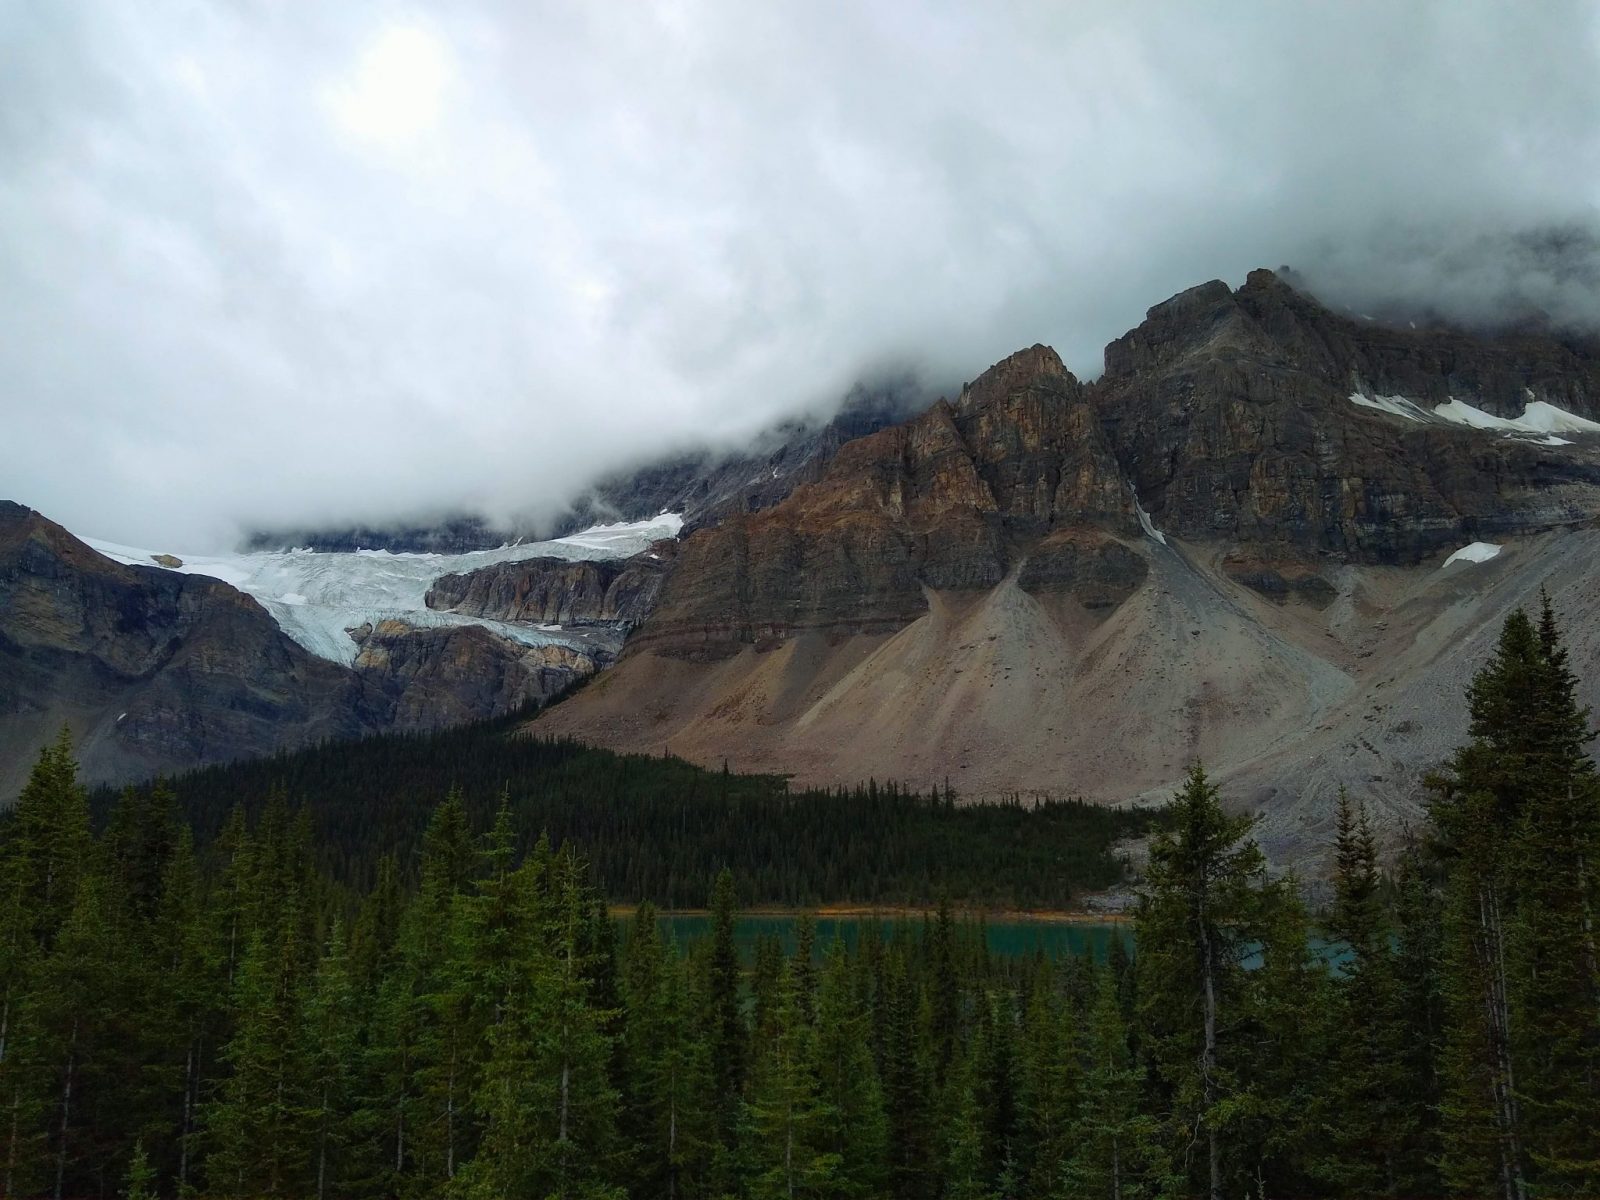 mountains with a hanging glacier above a lake and forests on a dark and overcast day